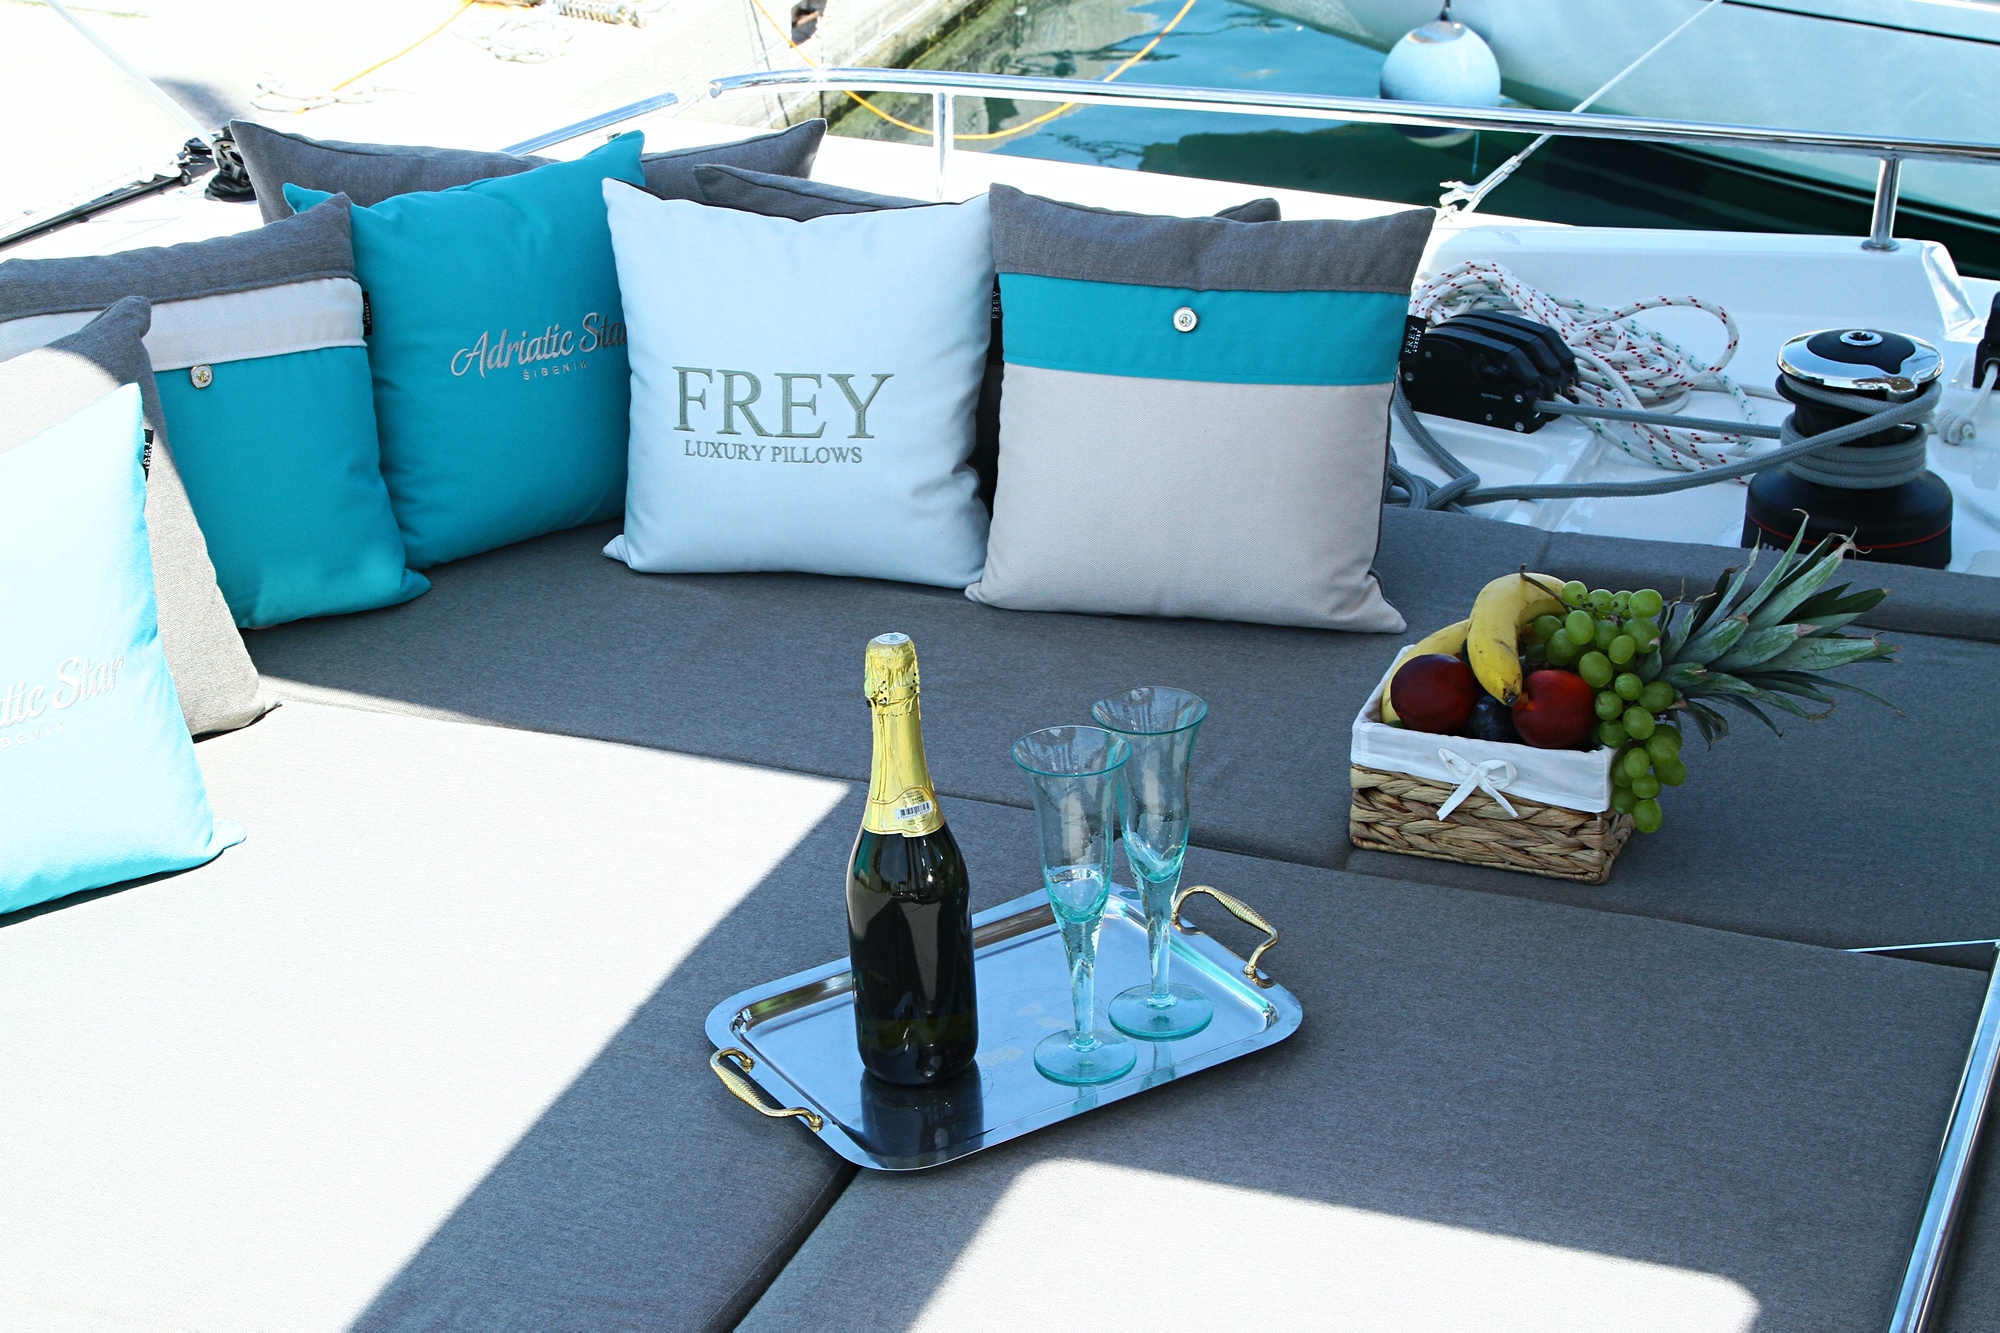 The secret to a pleasant & comfortable catamaran are Frey luxury products. Great while unwinding with a bottle of champagne.